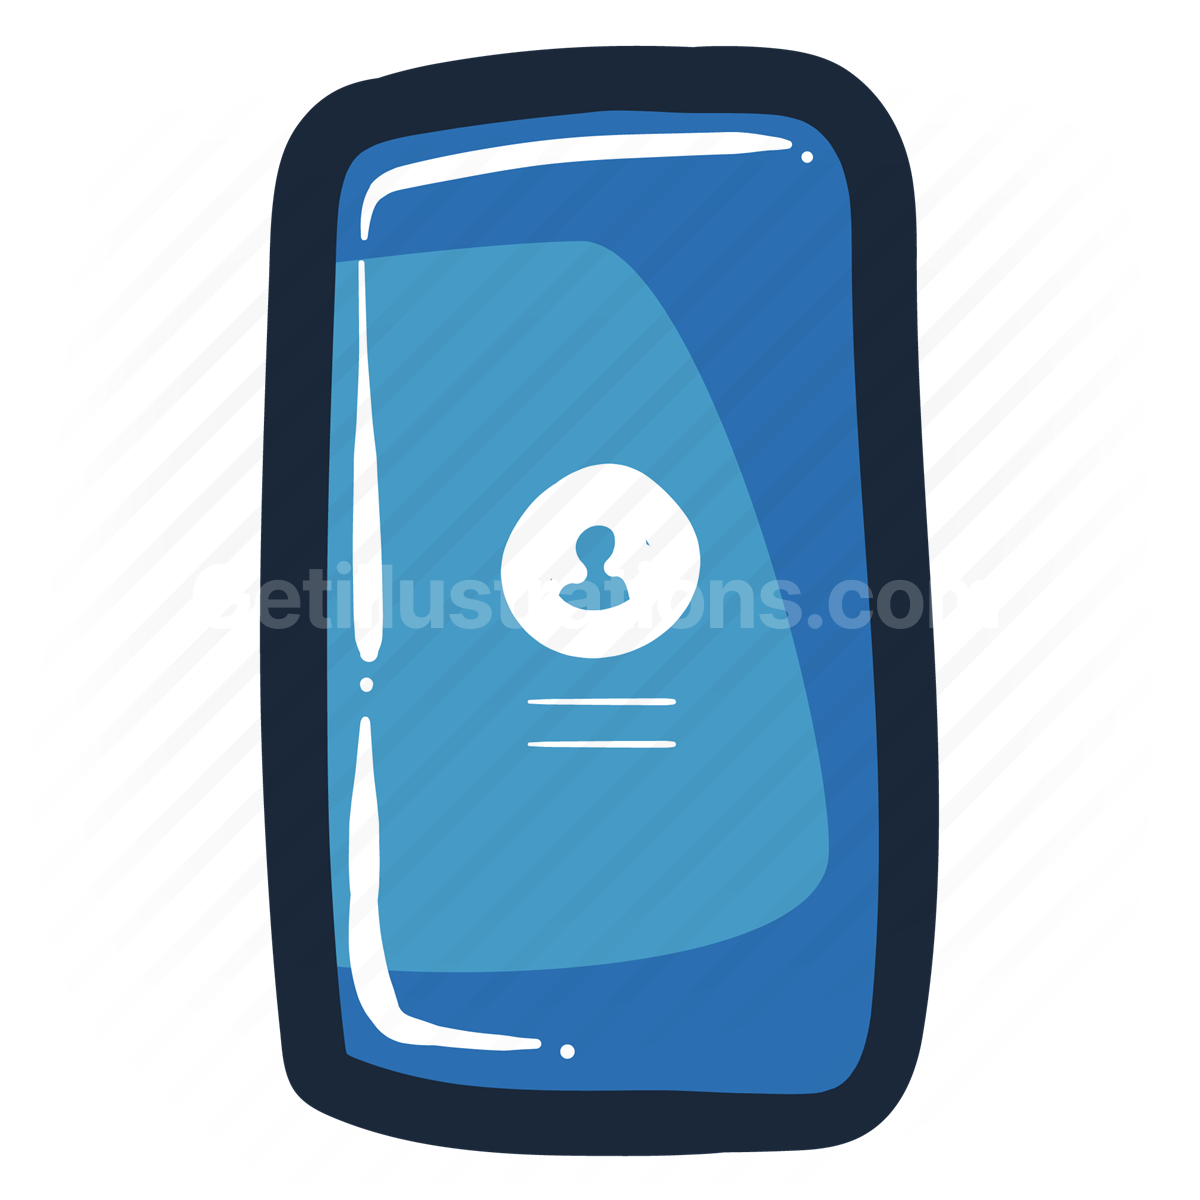 smartphone, phone, mobile, electronic, device, account, profile, login